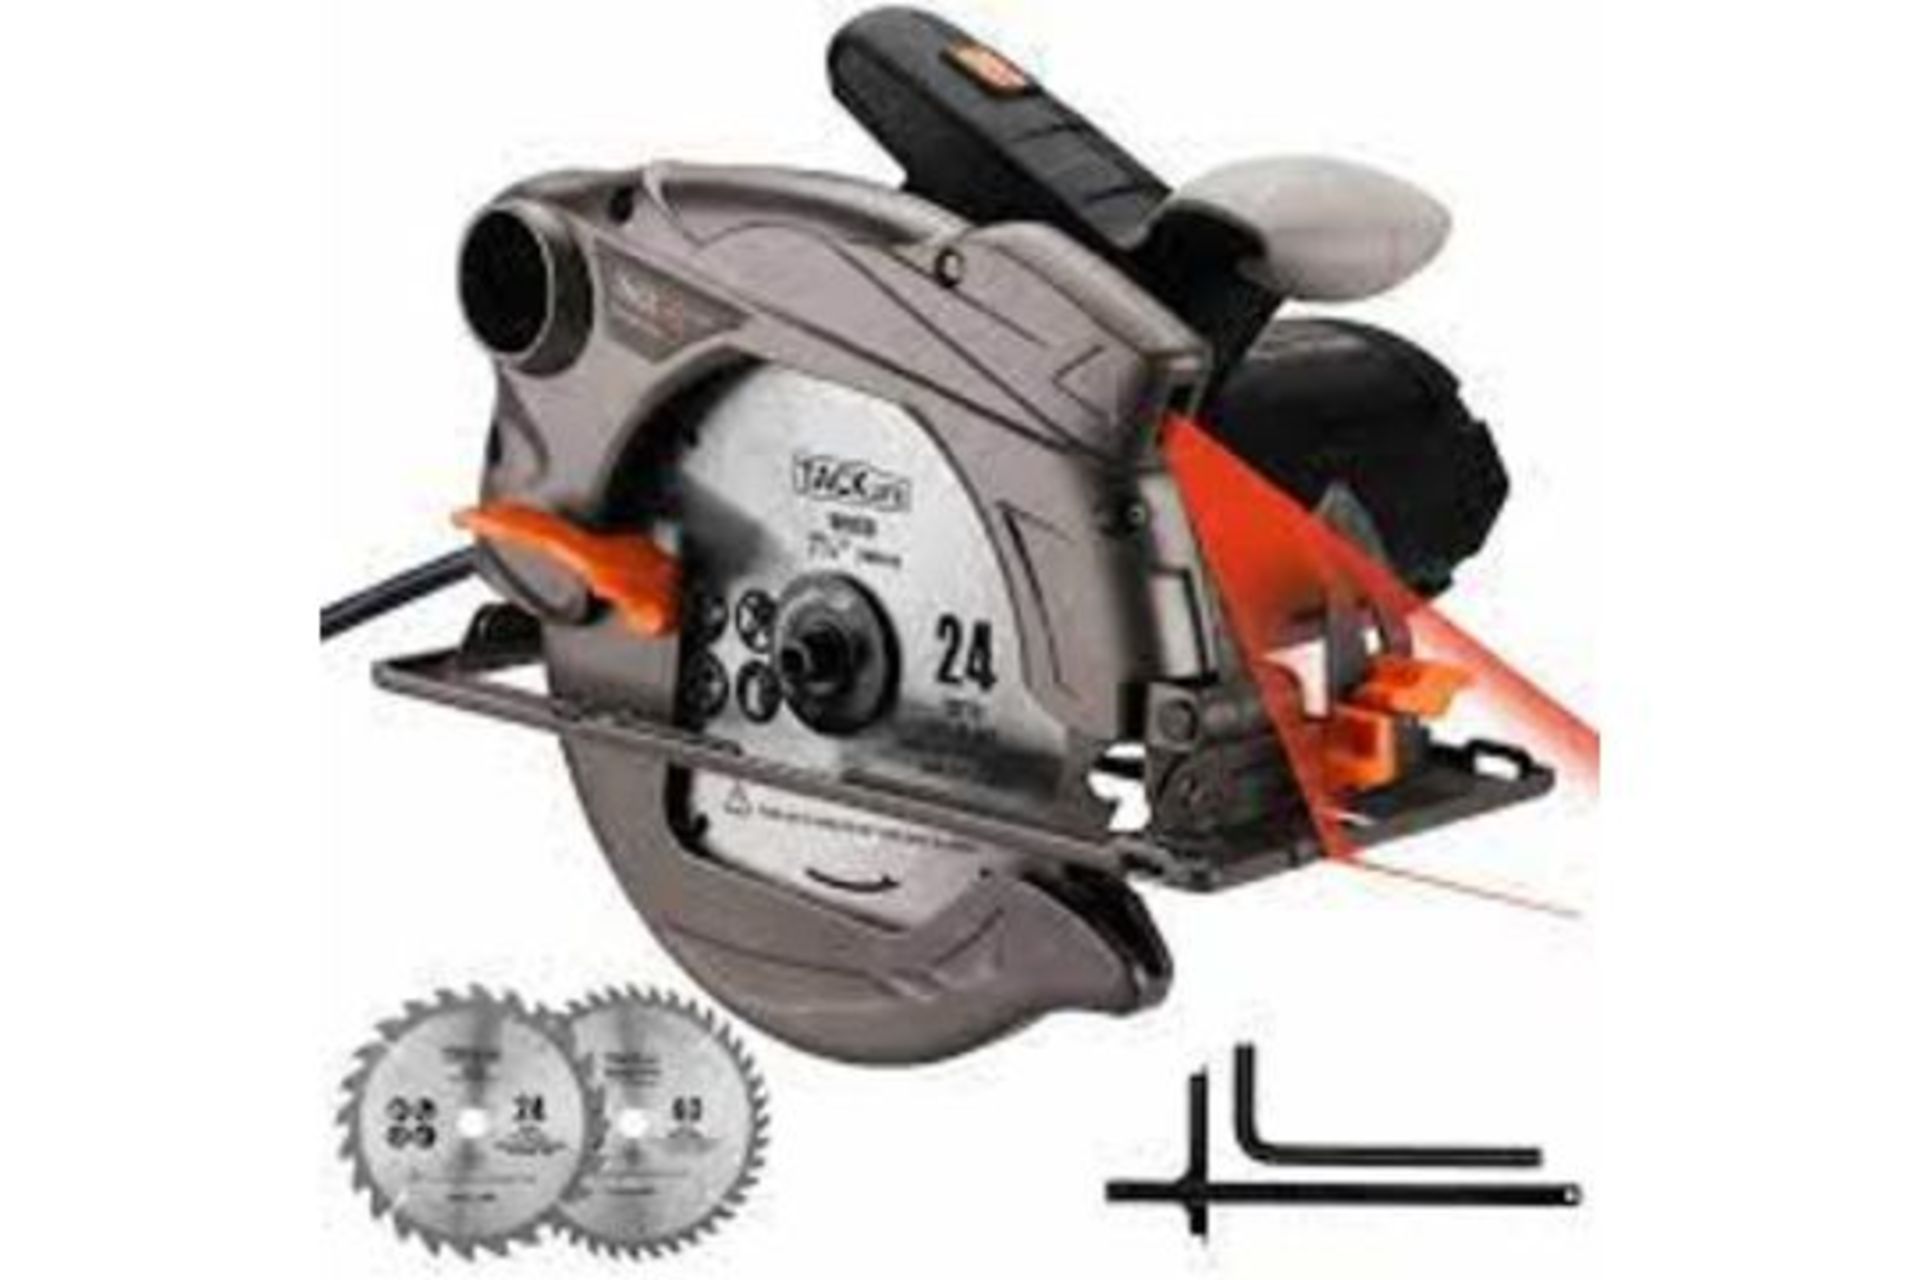 New Boxed Tacklife Electric Circular Saw,1500W, 5000 RPM With Bevel Cuts 2-3/5'